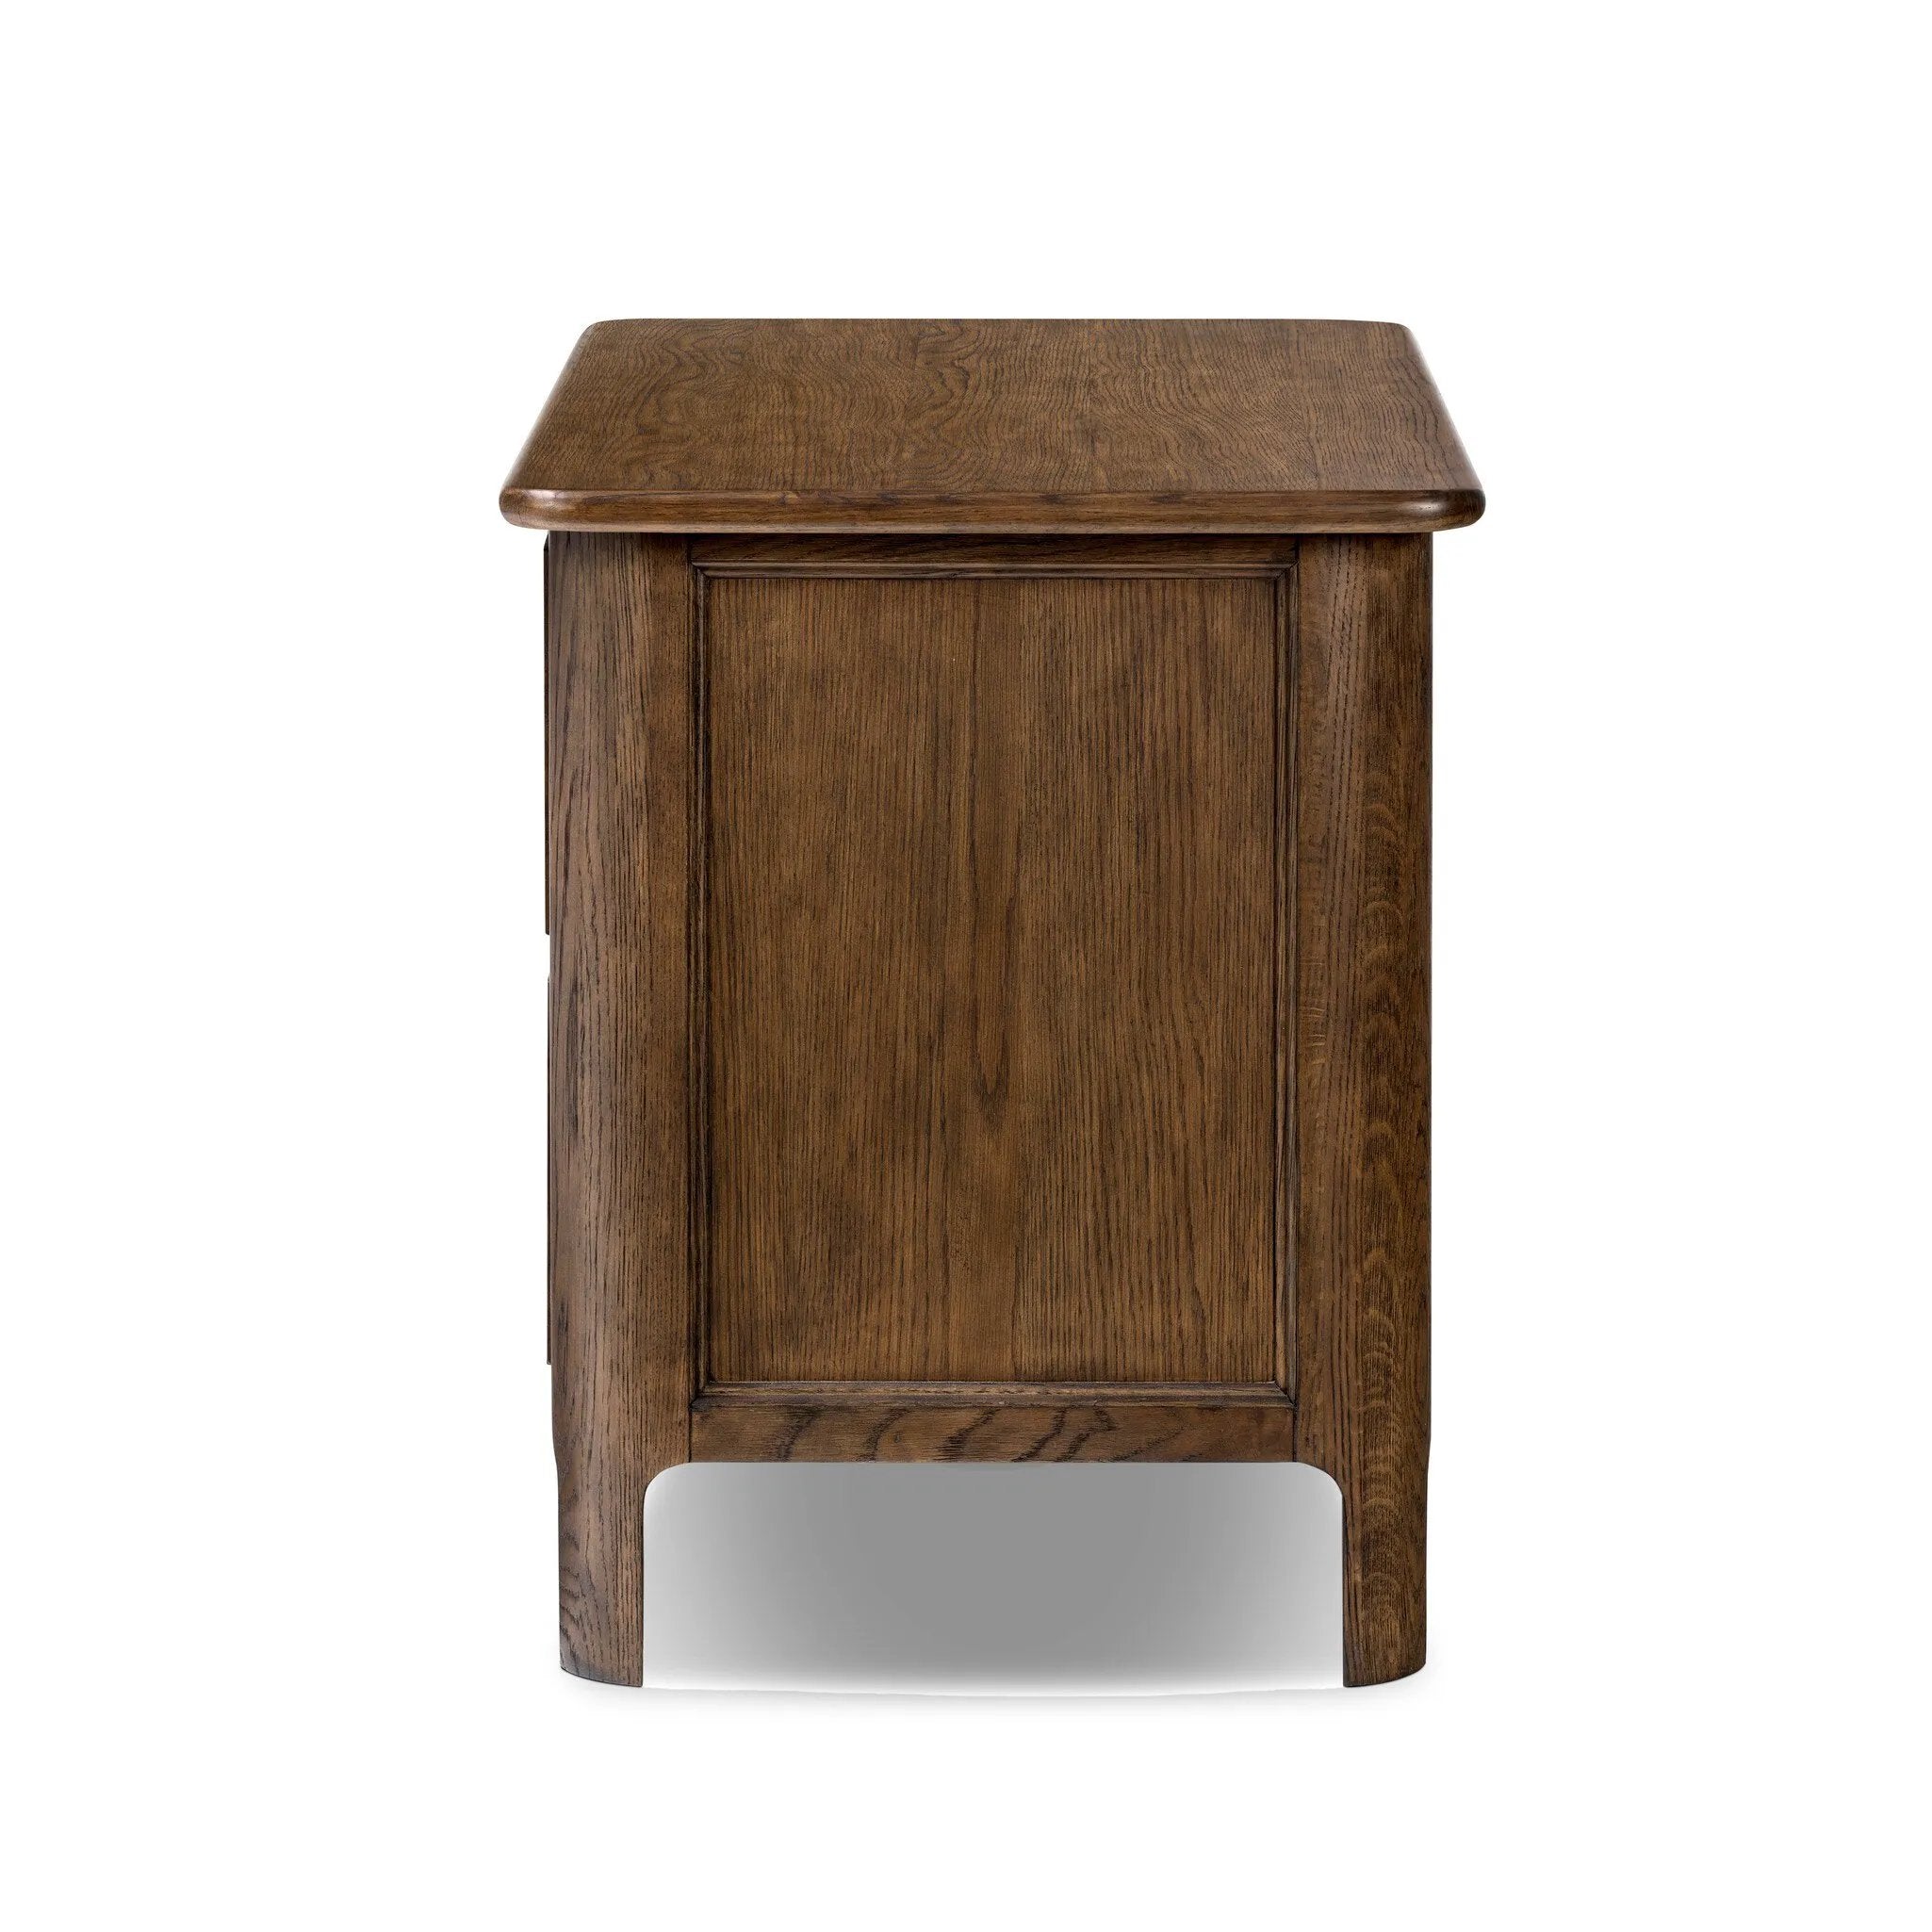 Like an heirloom nightstand with two roomy drawers, this aged oak design has room for it all. Detailed with an overhang surface, carved edges top to bottom, angled legs and oval drawer pulls finished in dark gunmetal.Collection: Bolto Amethyst Home provides interior design, new home construction design consulting, vintage area rugs, and lighting in the Winter Garden metro area.